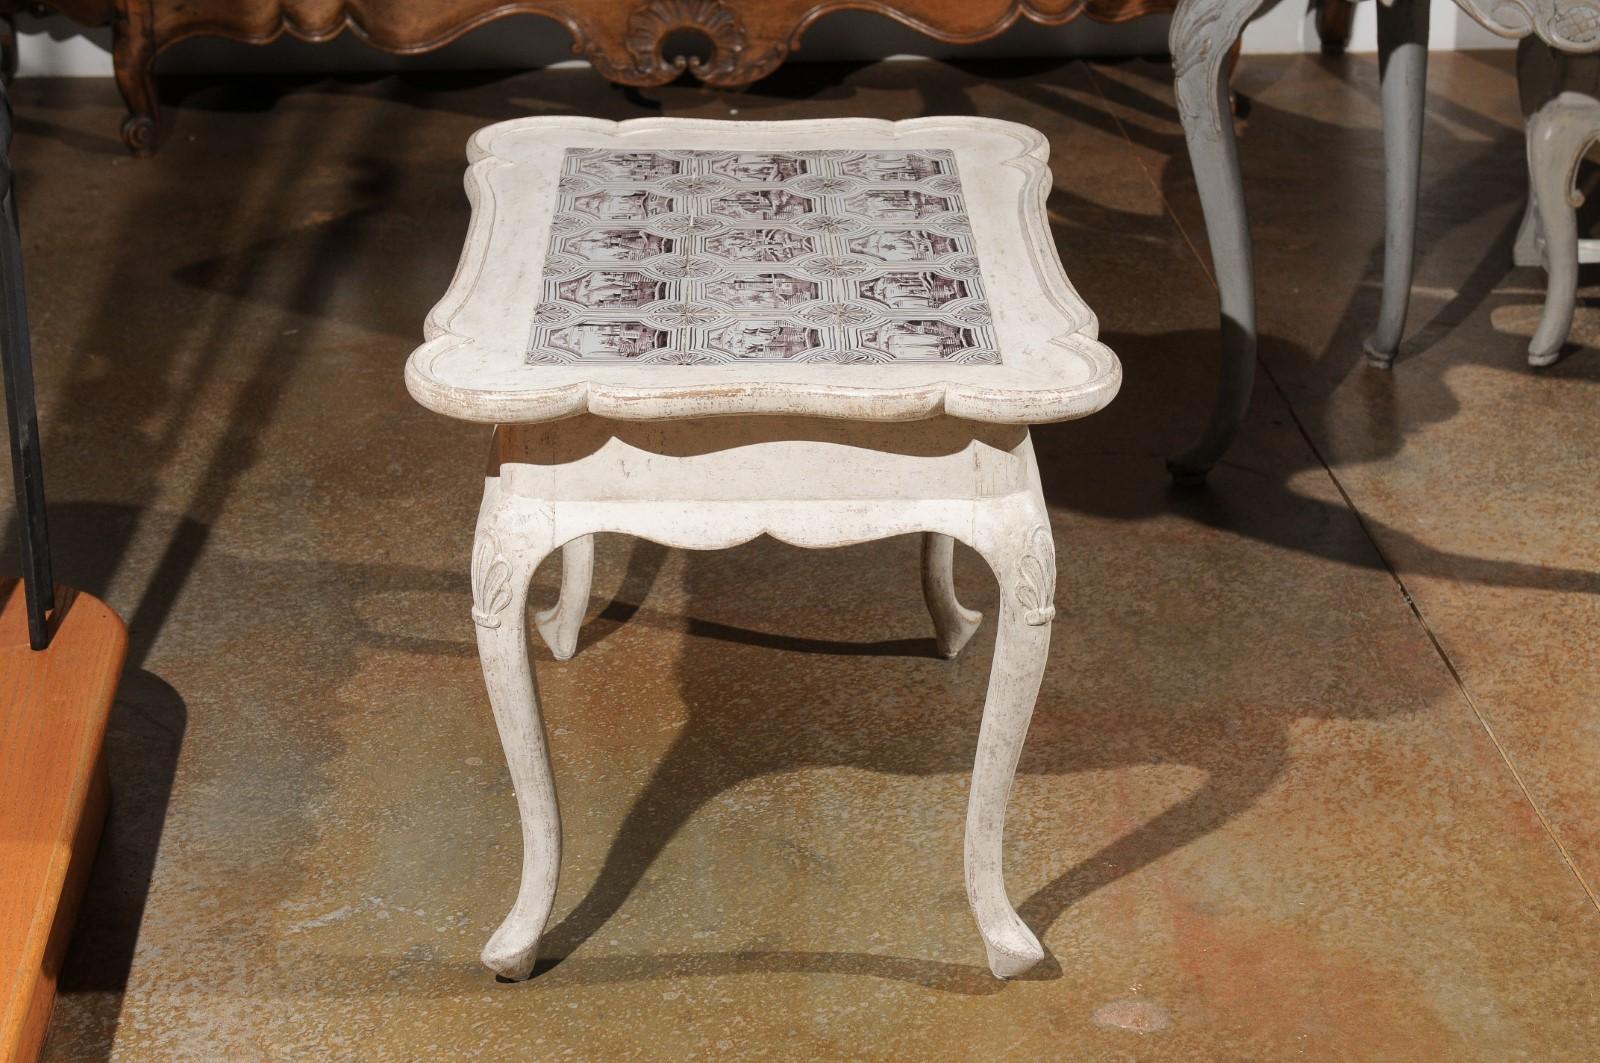 A Danish painted wood Rococo style table from the 20th century, with tiles, cabriole legs and carved apron. Created in Denmark during the 20th century, this Rococo style table features an eye-catching top with serpentine lines and tile decor,